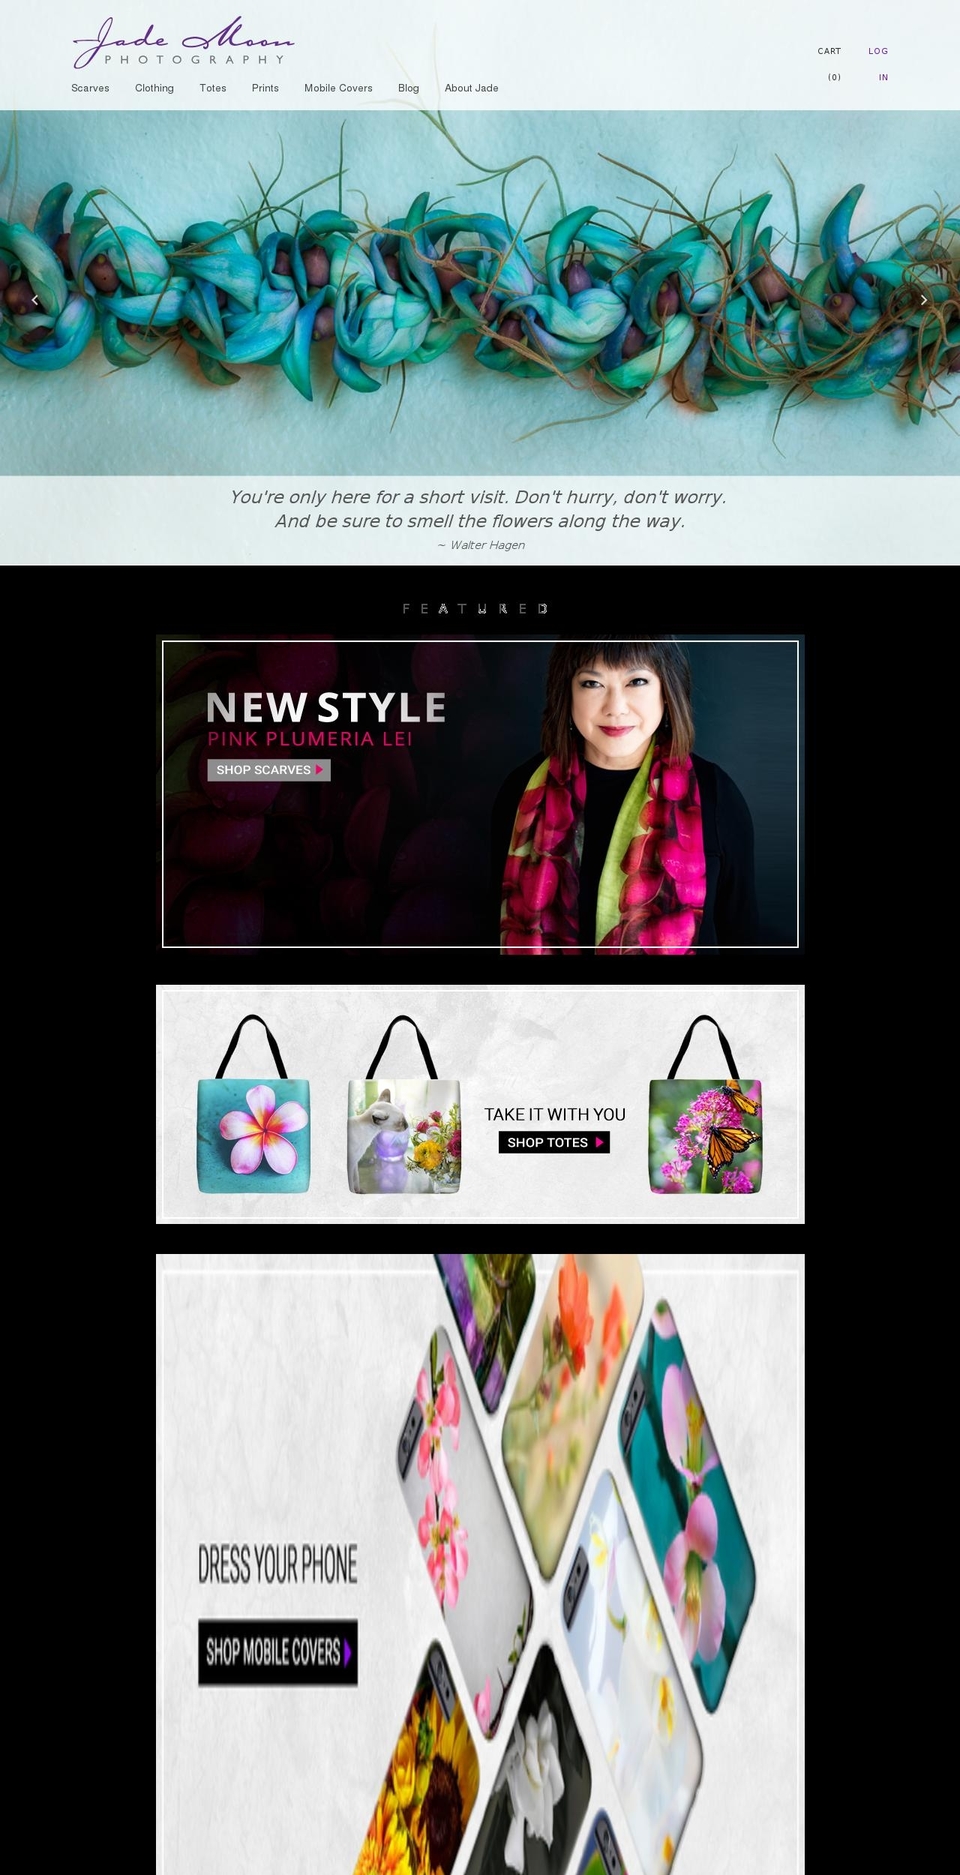 Cypress Shopify theme site example jademoonphotography.com